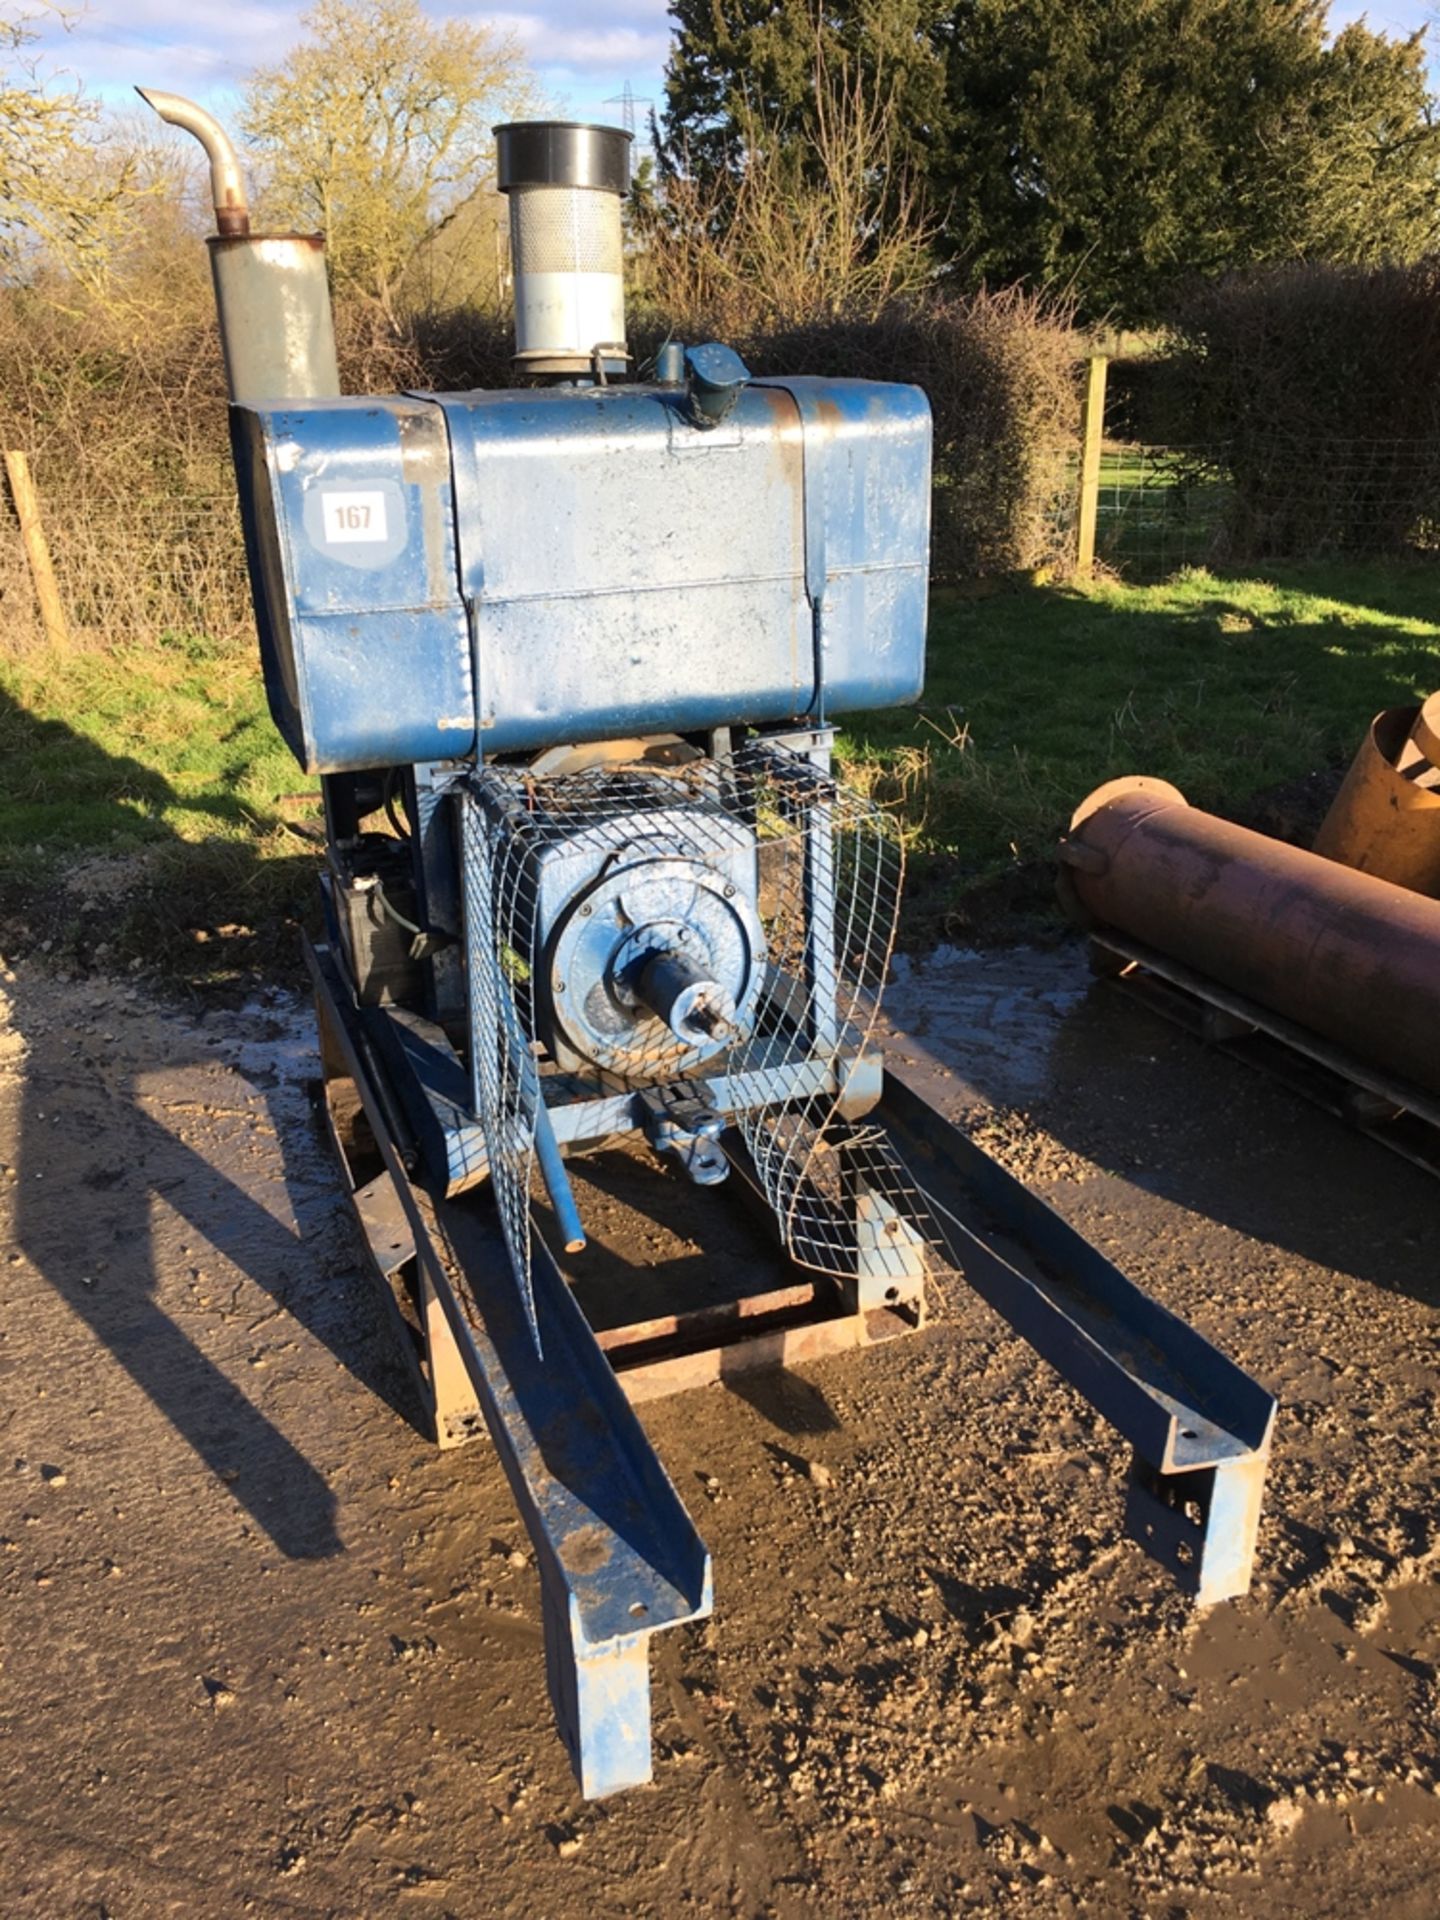 Ford 6cyl diesel engine PTO driv unit to suit up to 16t drier (TO BE SOLD AT THE END OF THE SALE)